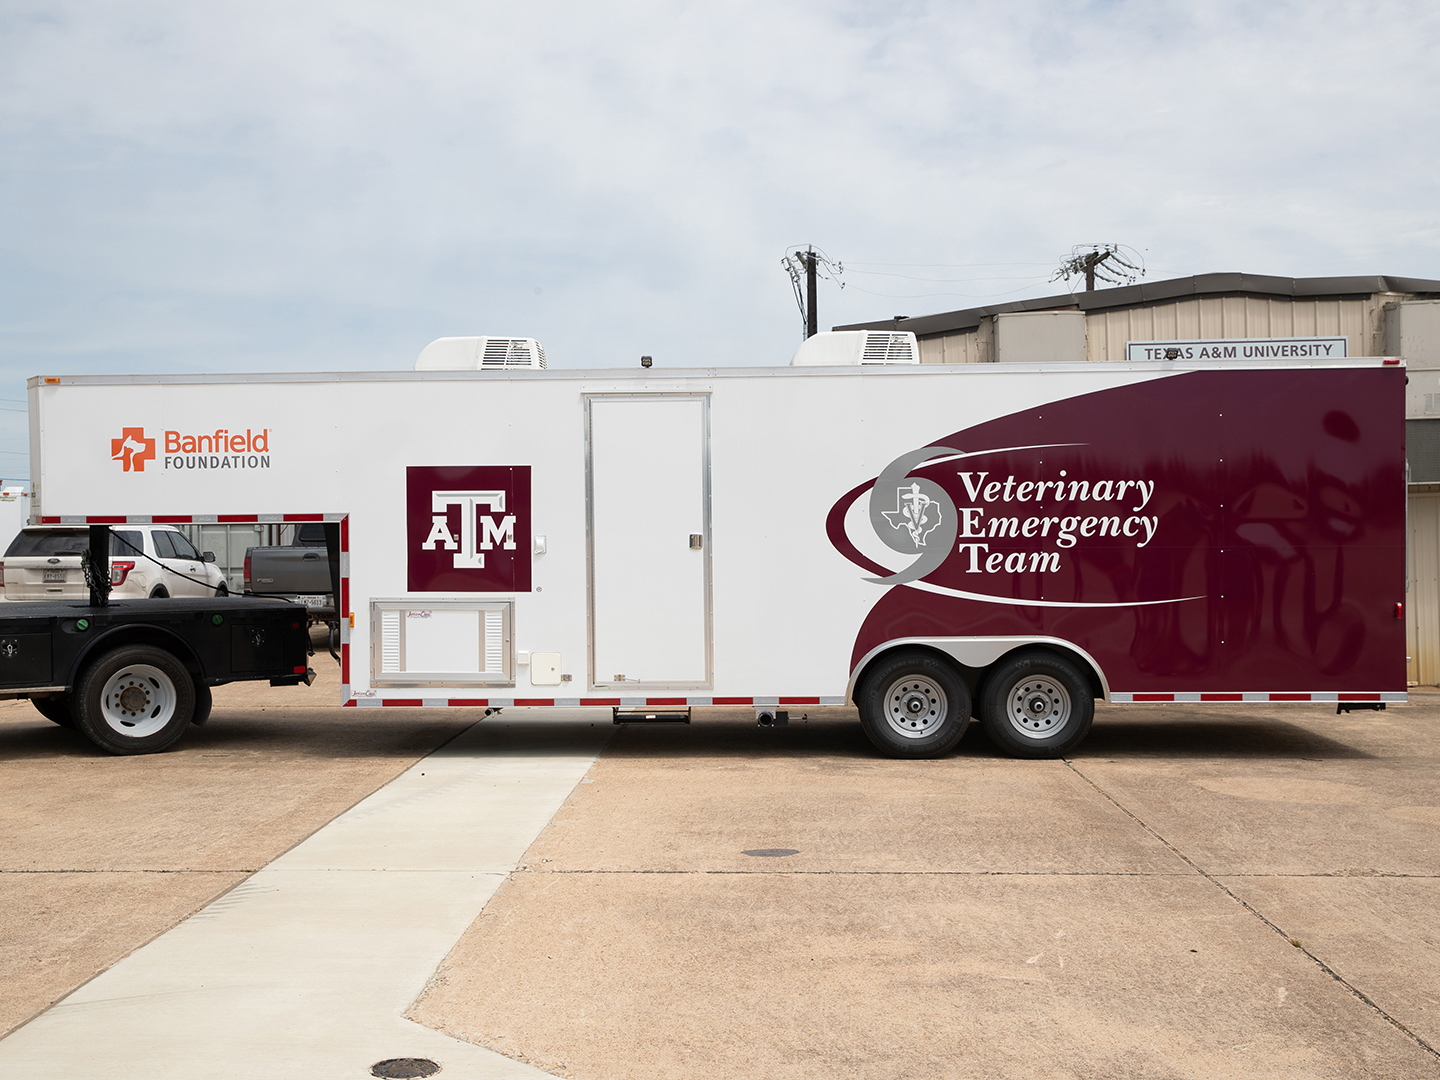 The VET's new trailer donated by the Banfield Foundation